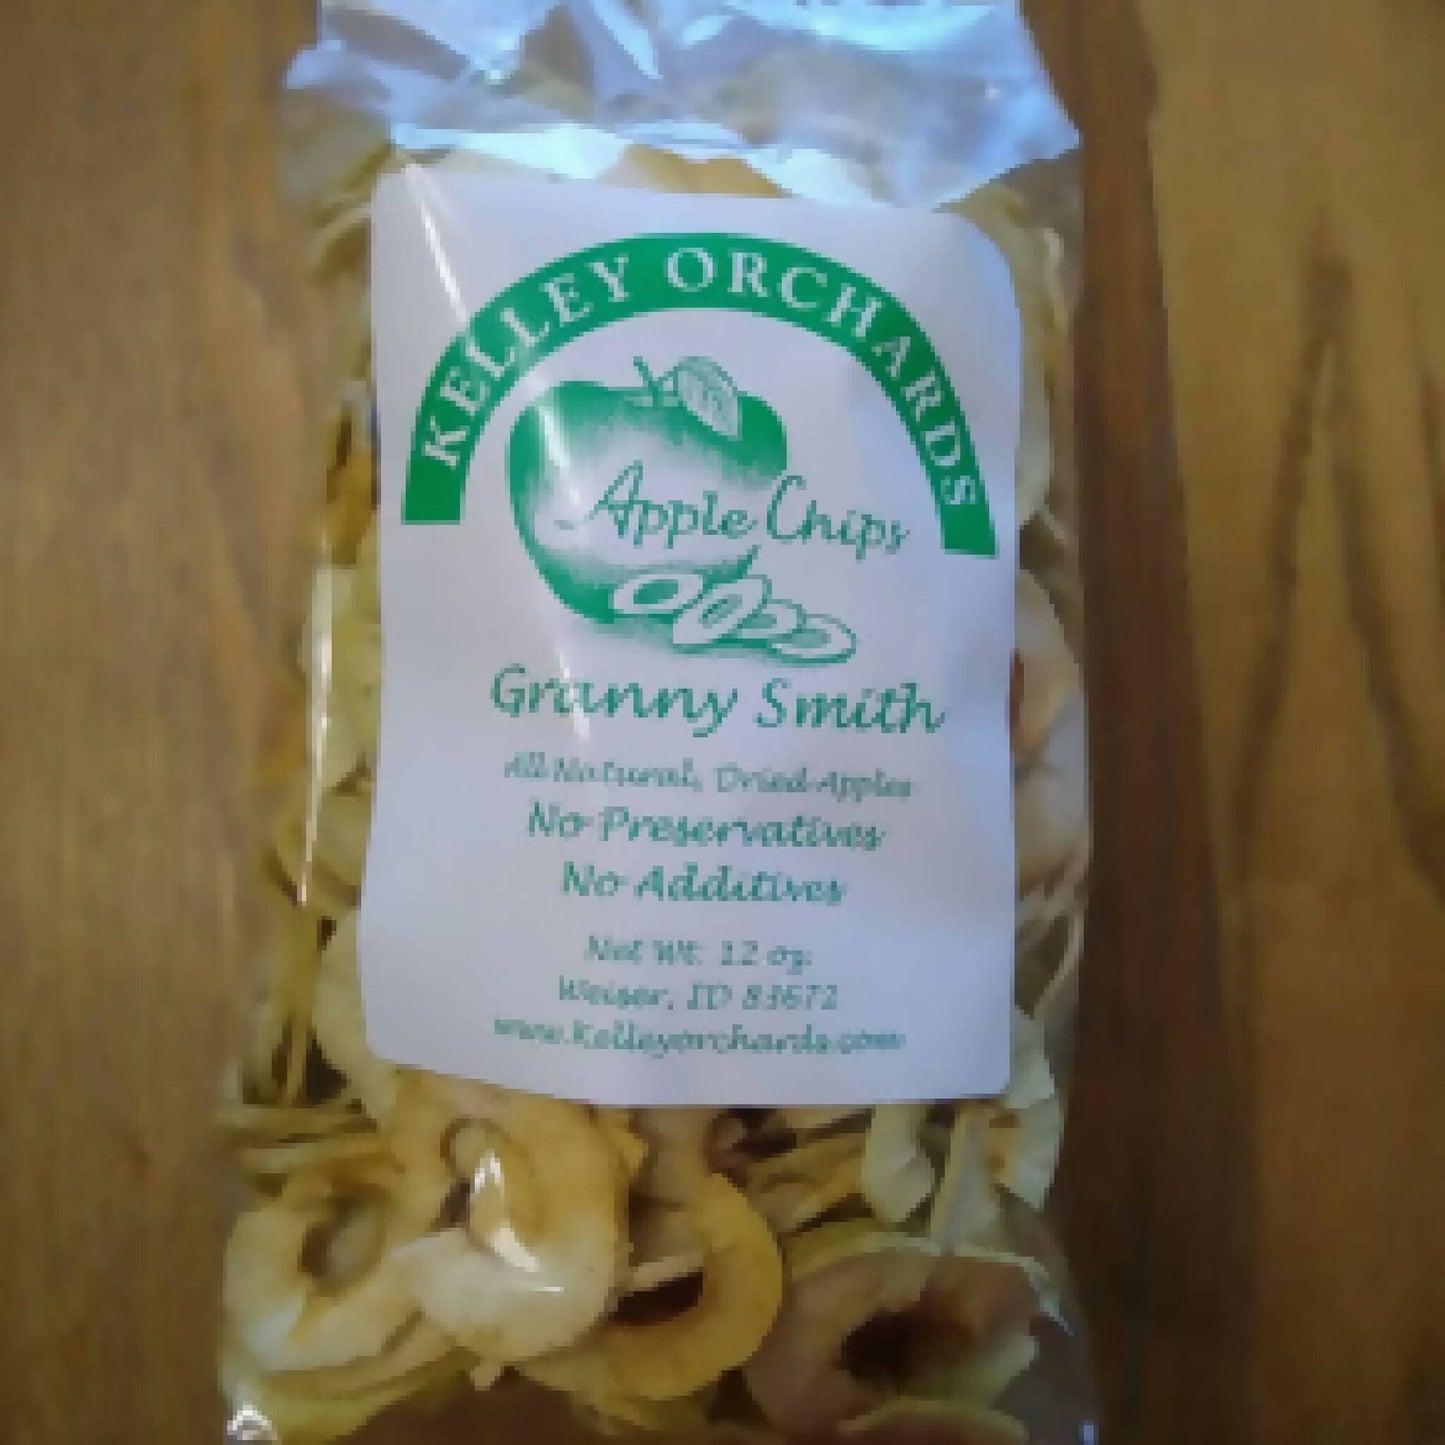 Granny Smith Apple Chips